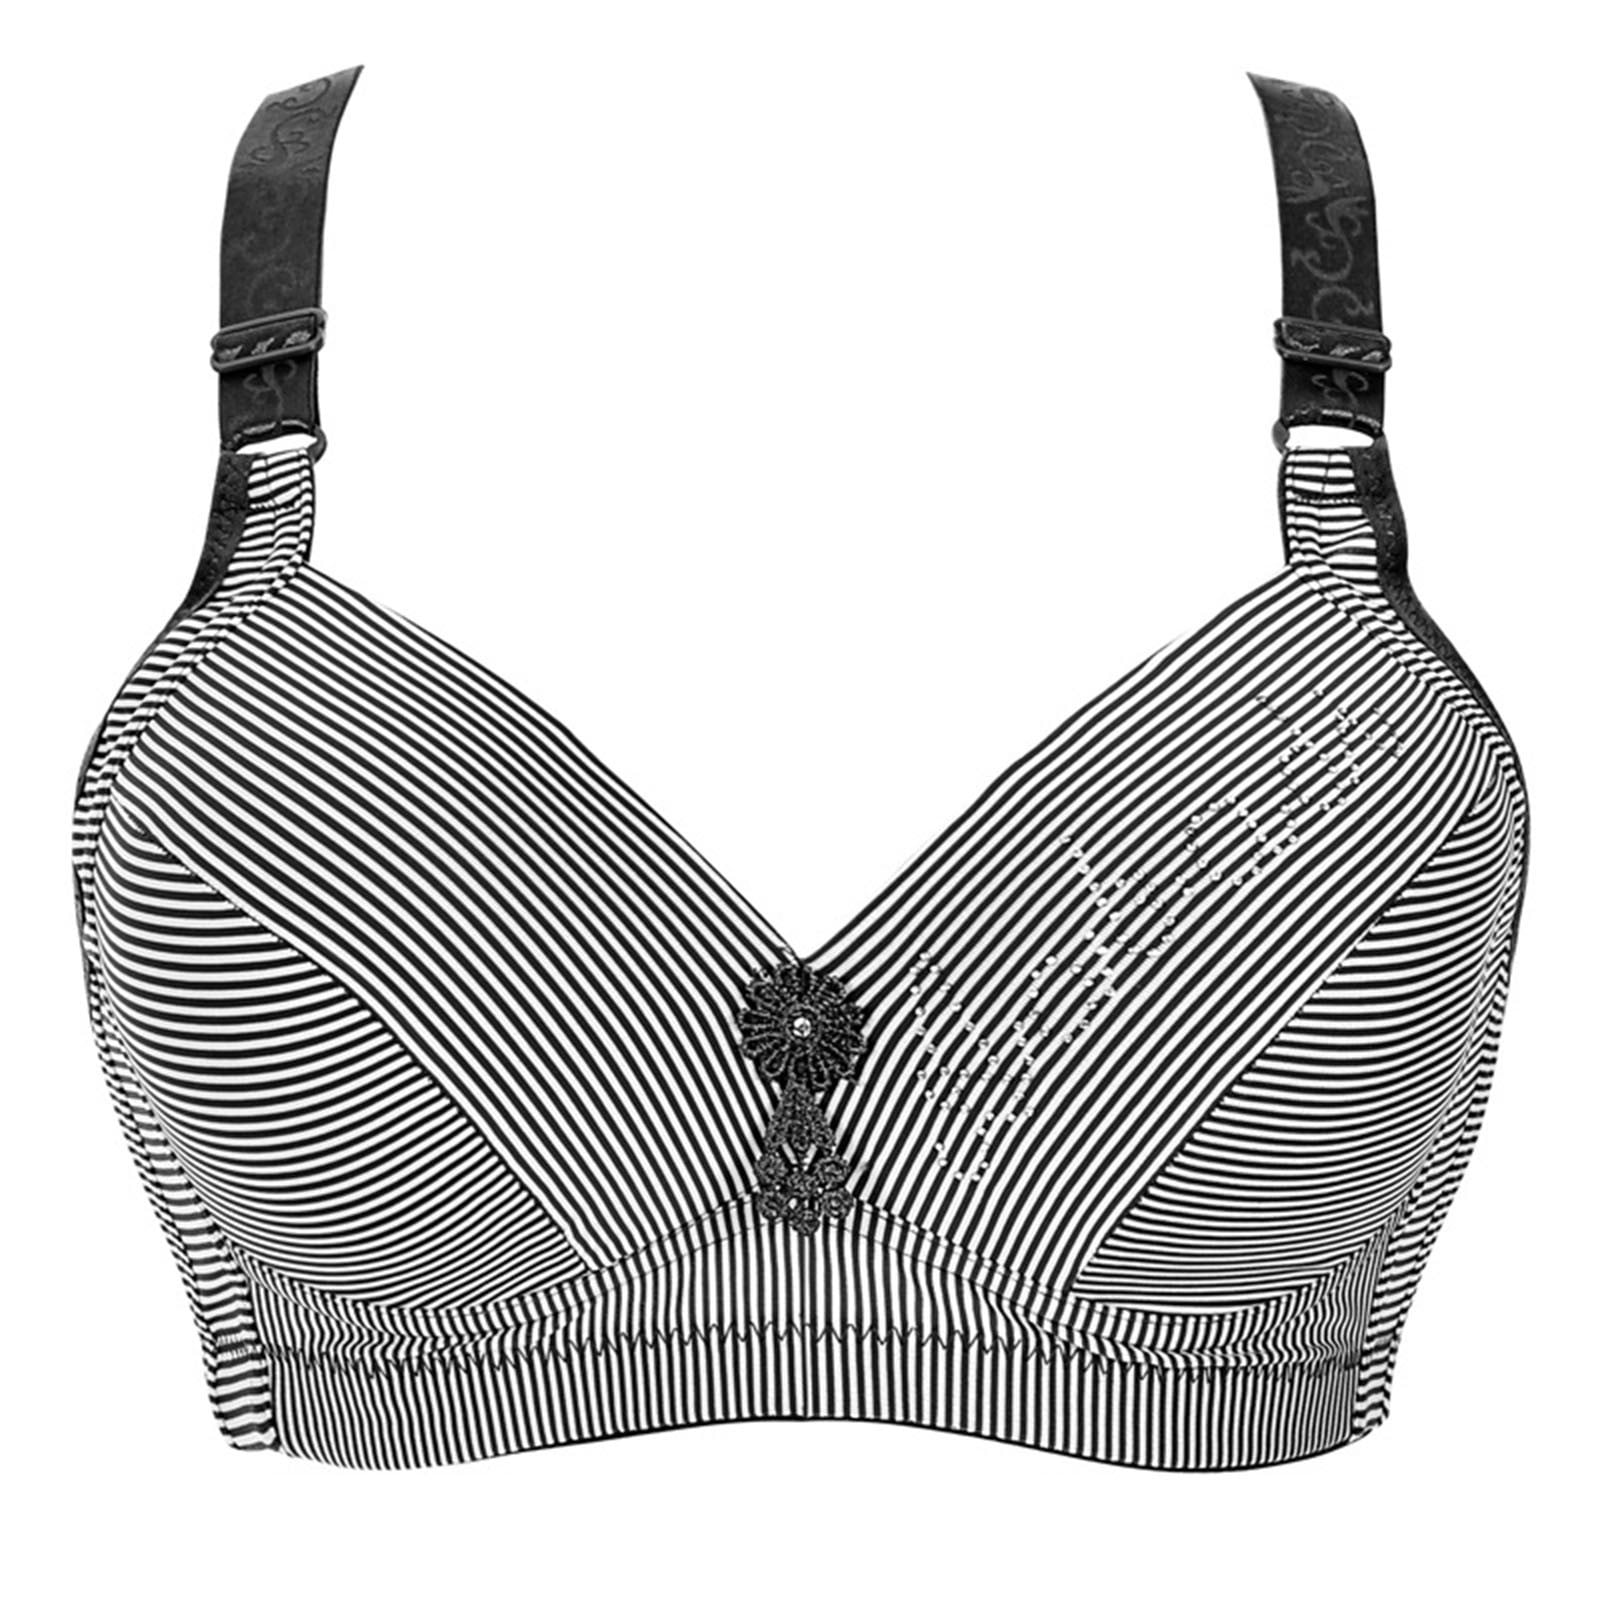 QUYUON Underwear Bras Women's Color Comfortable Hollow Out Perspective ...